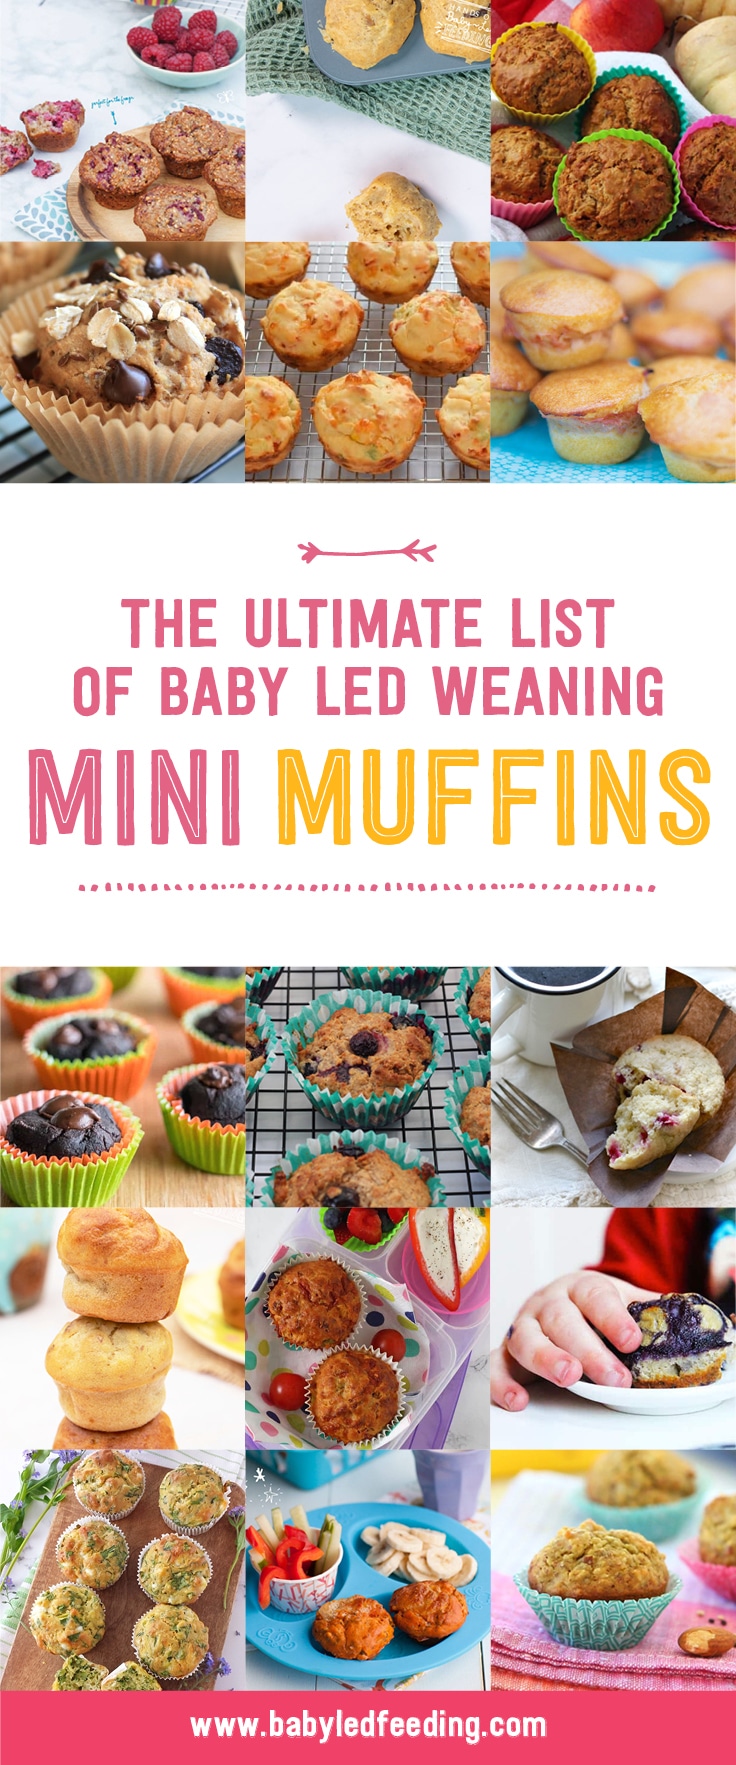 Ultimate list of Mini Muffins! 25+ Healthy muffin recipe for babies and toddlers. Muffins are the ultimate freezer friendly veggie hiding finger foods for picky eaters and busy families! #minimuffins #muffinrecipe #babyledweaning #fingerfood #makeahead